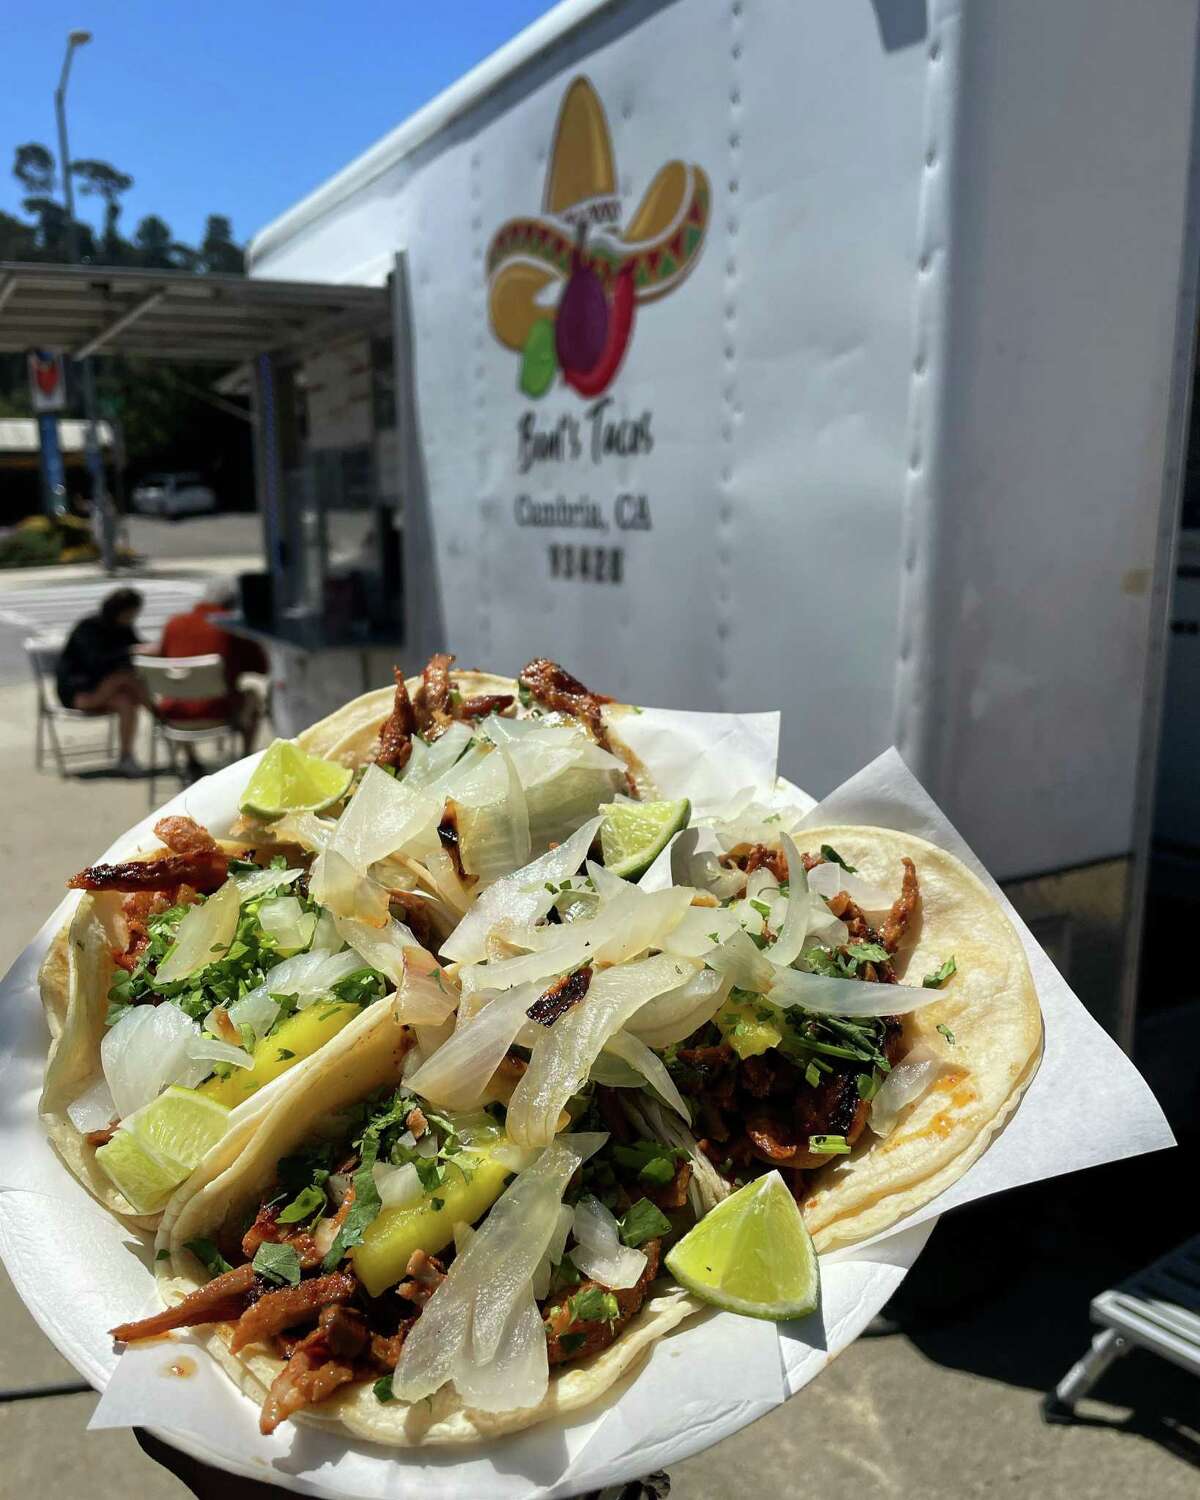 Al pastor tacos are the must-order from Boni's Tacos in Cambria.